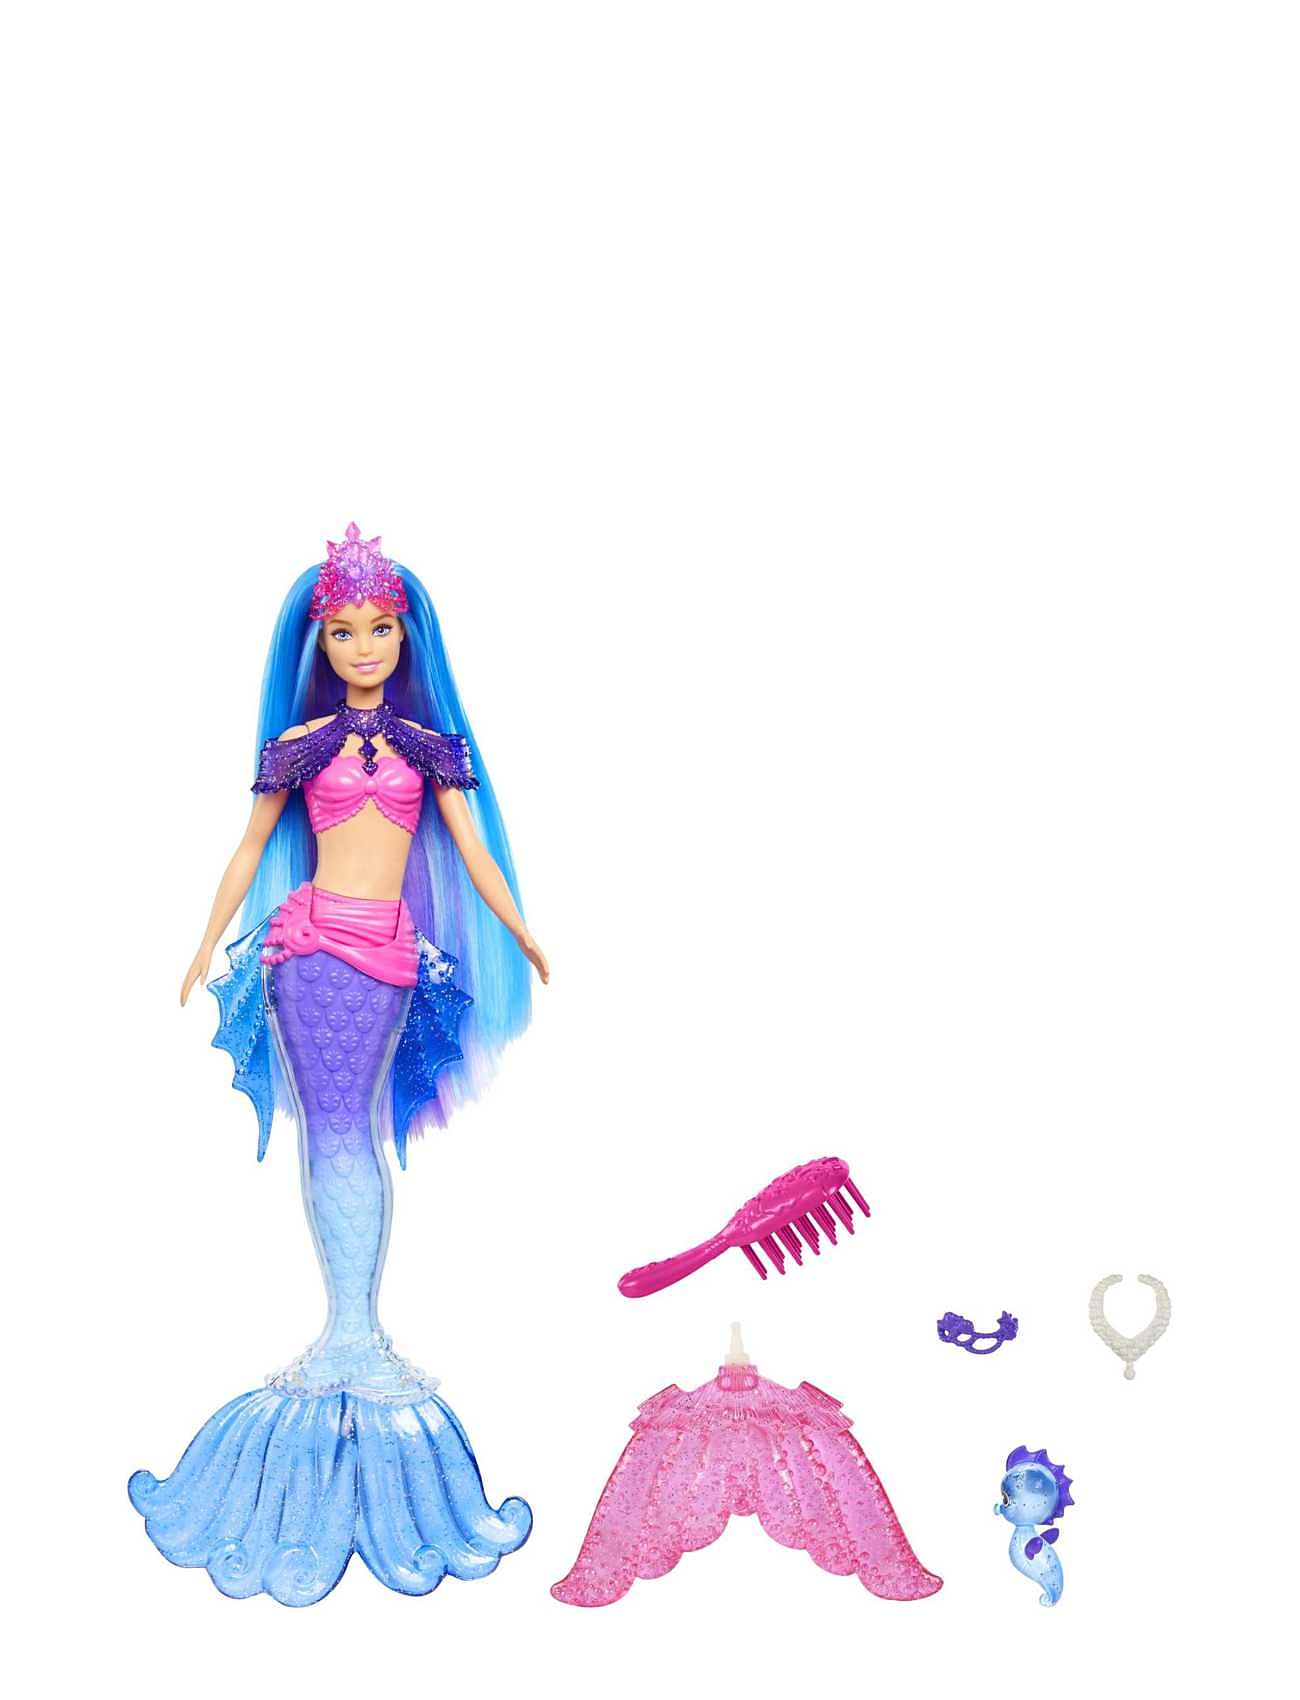 Mermaid Power Doll And Accessories Toys Dolls & Accessories Dolls Blue Barbie